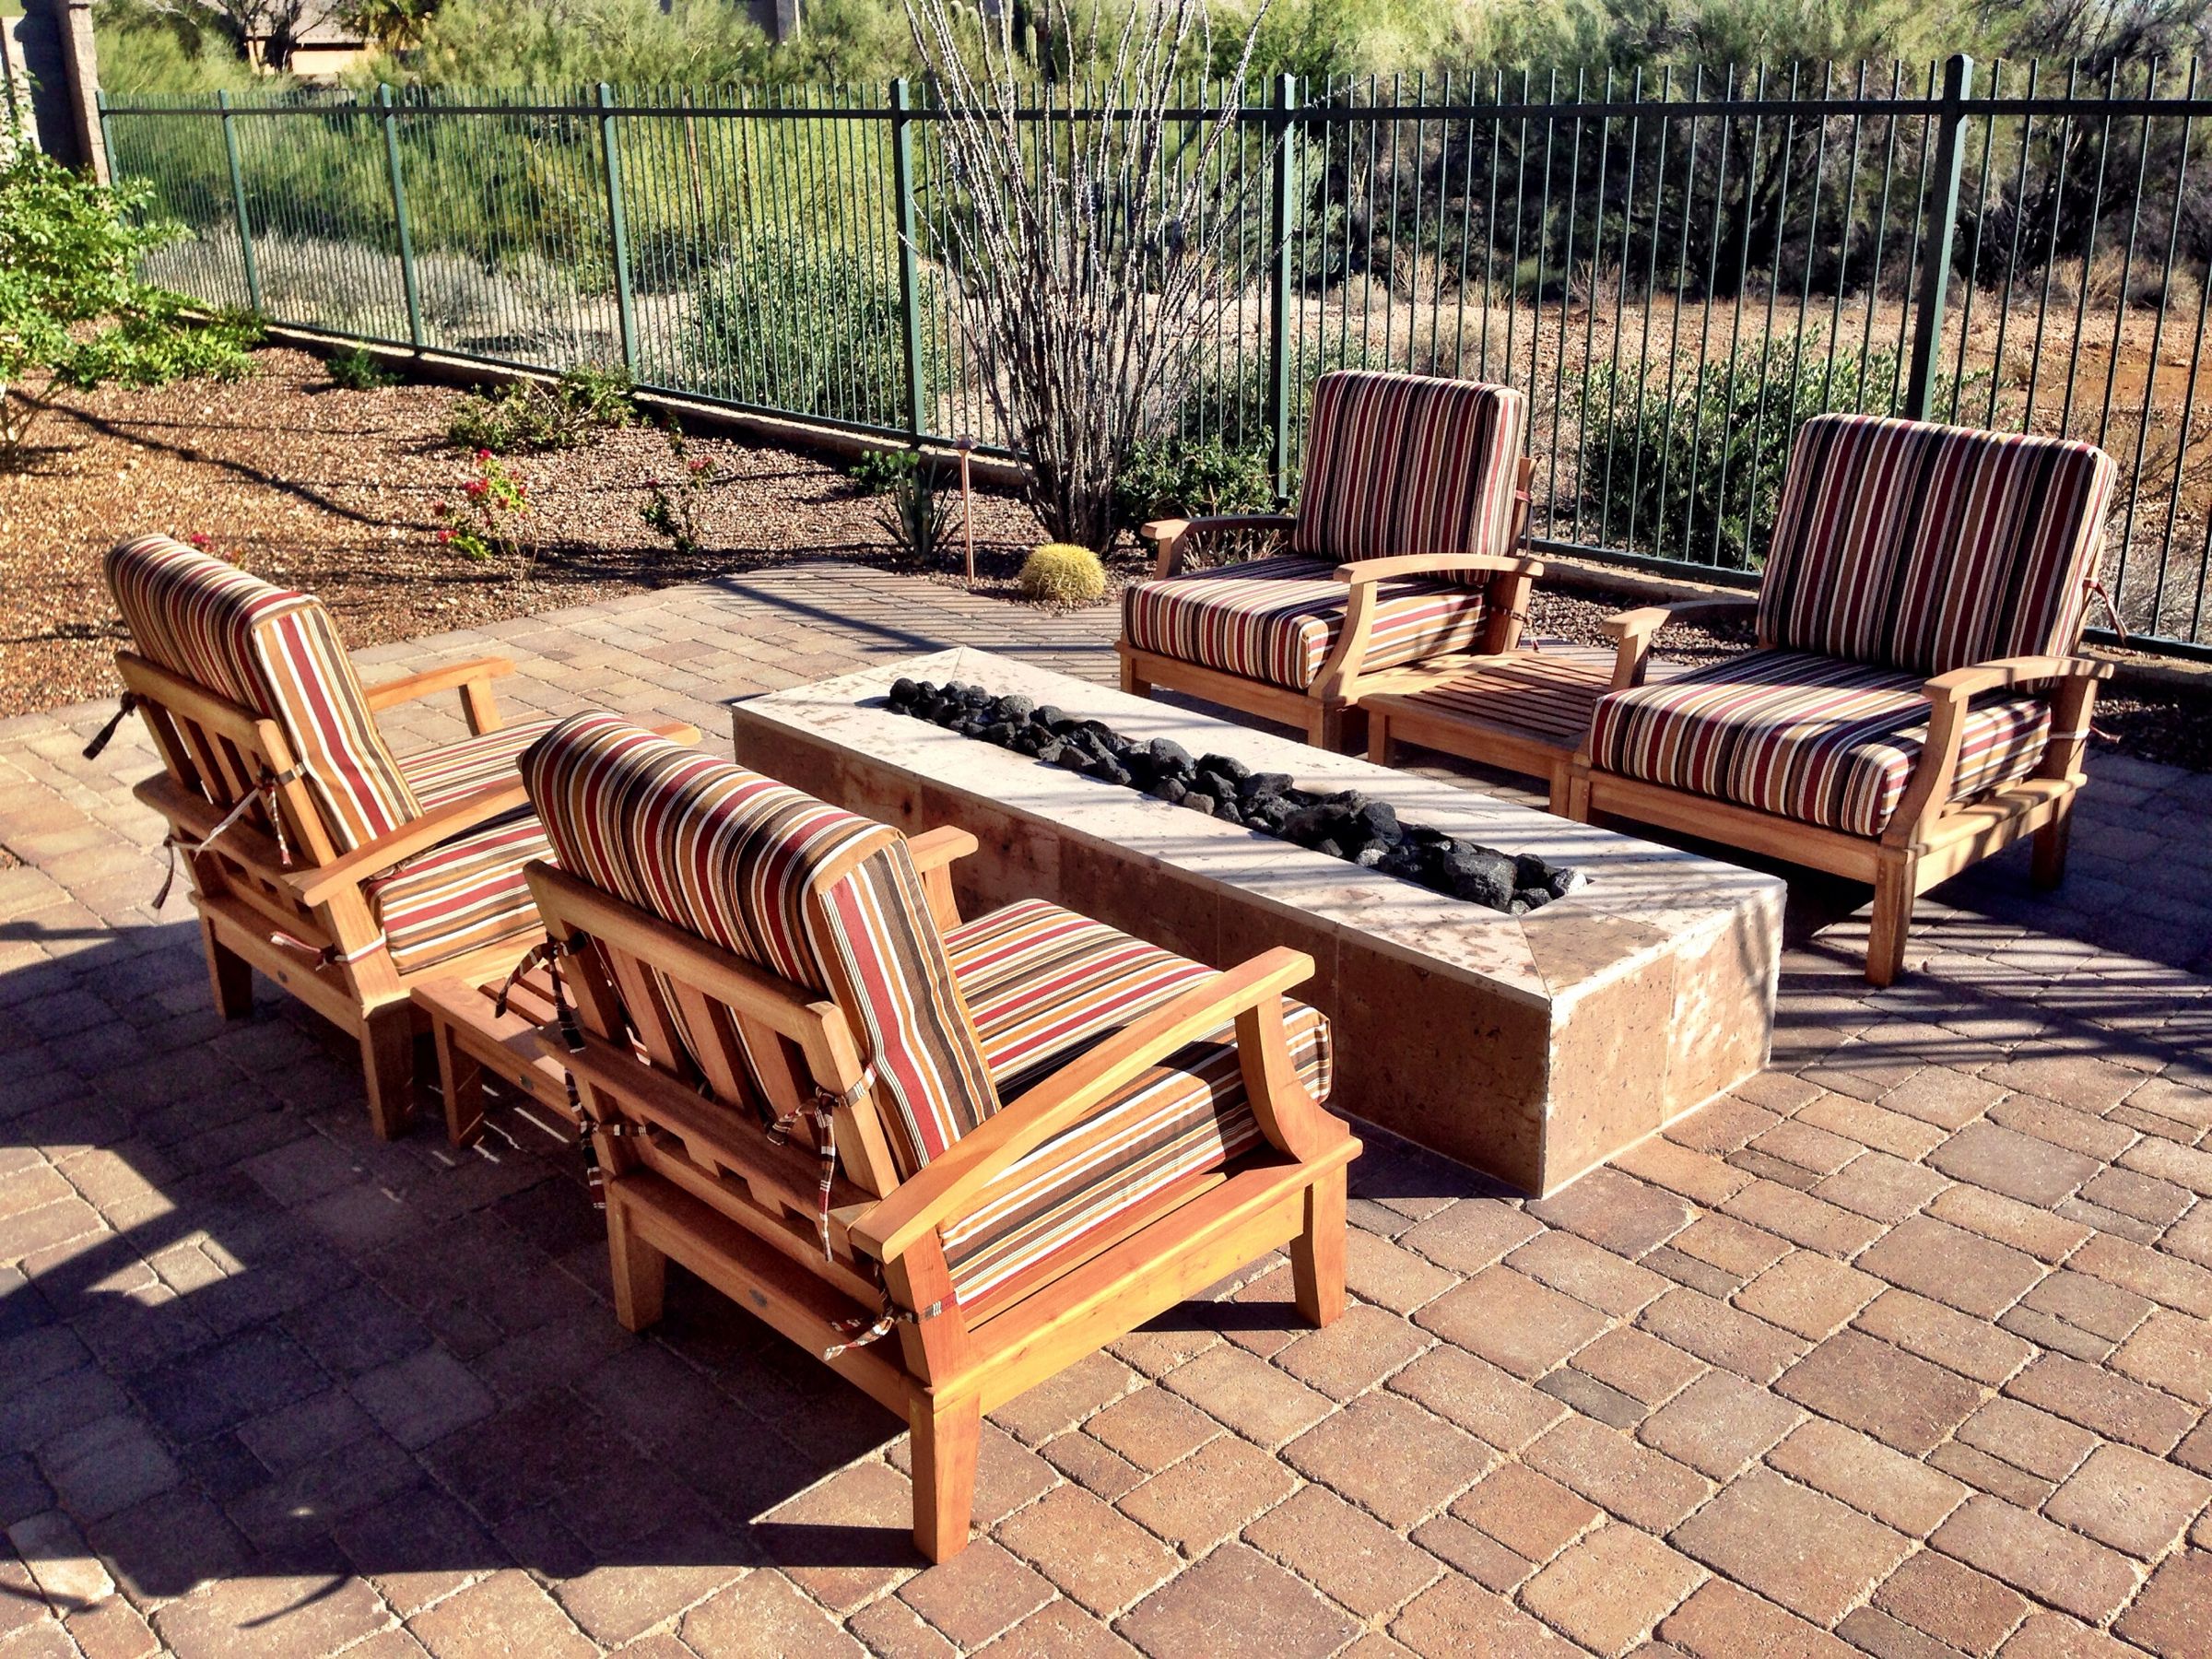 WholesaleTeak Outdoor Patio Grade-A Teak Wood 5 Piece Teak Sofa Set - 4 Lounge Chairs and 35" Round Coffee Table -Furniture only --Somer Collection #WMSSSA3 - image 4 of 6